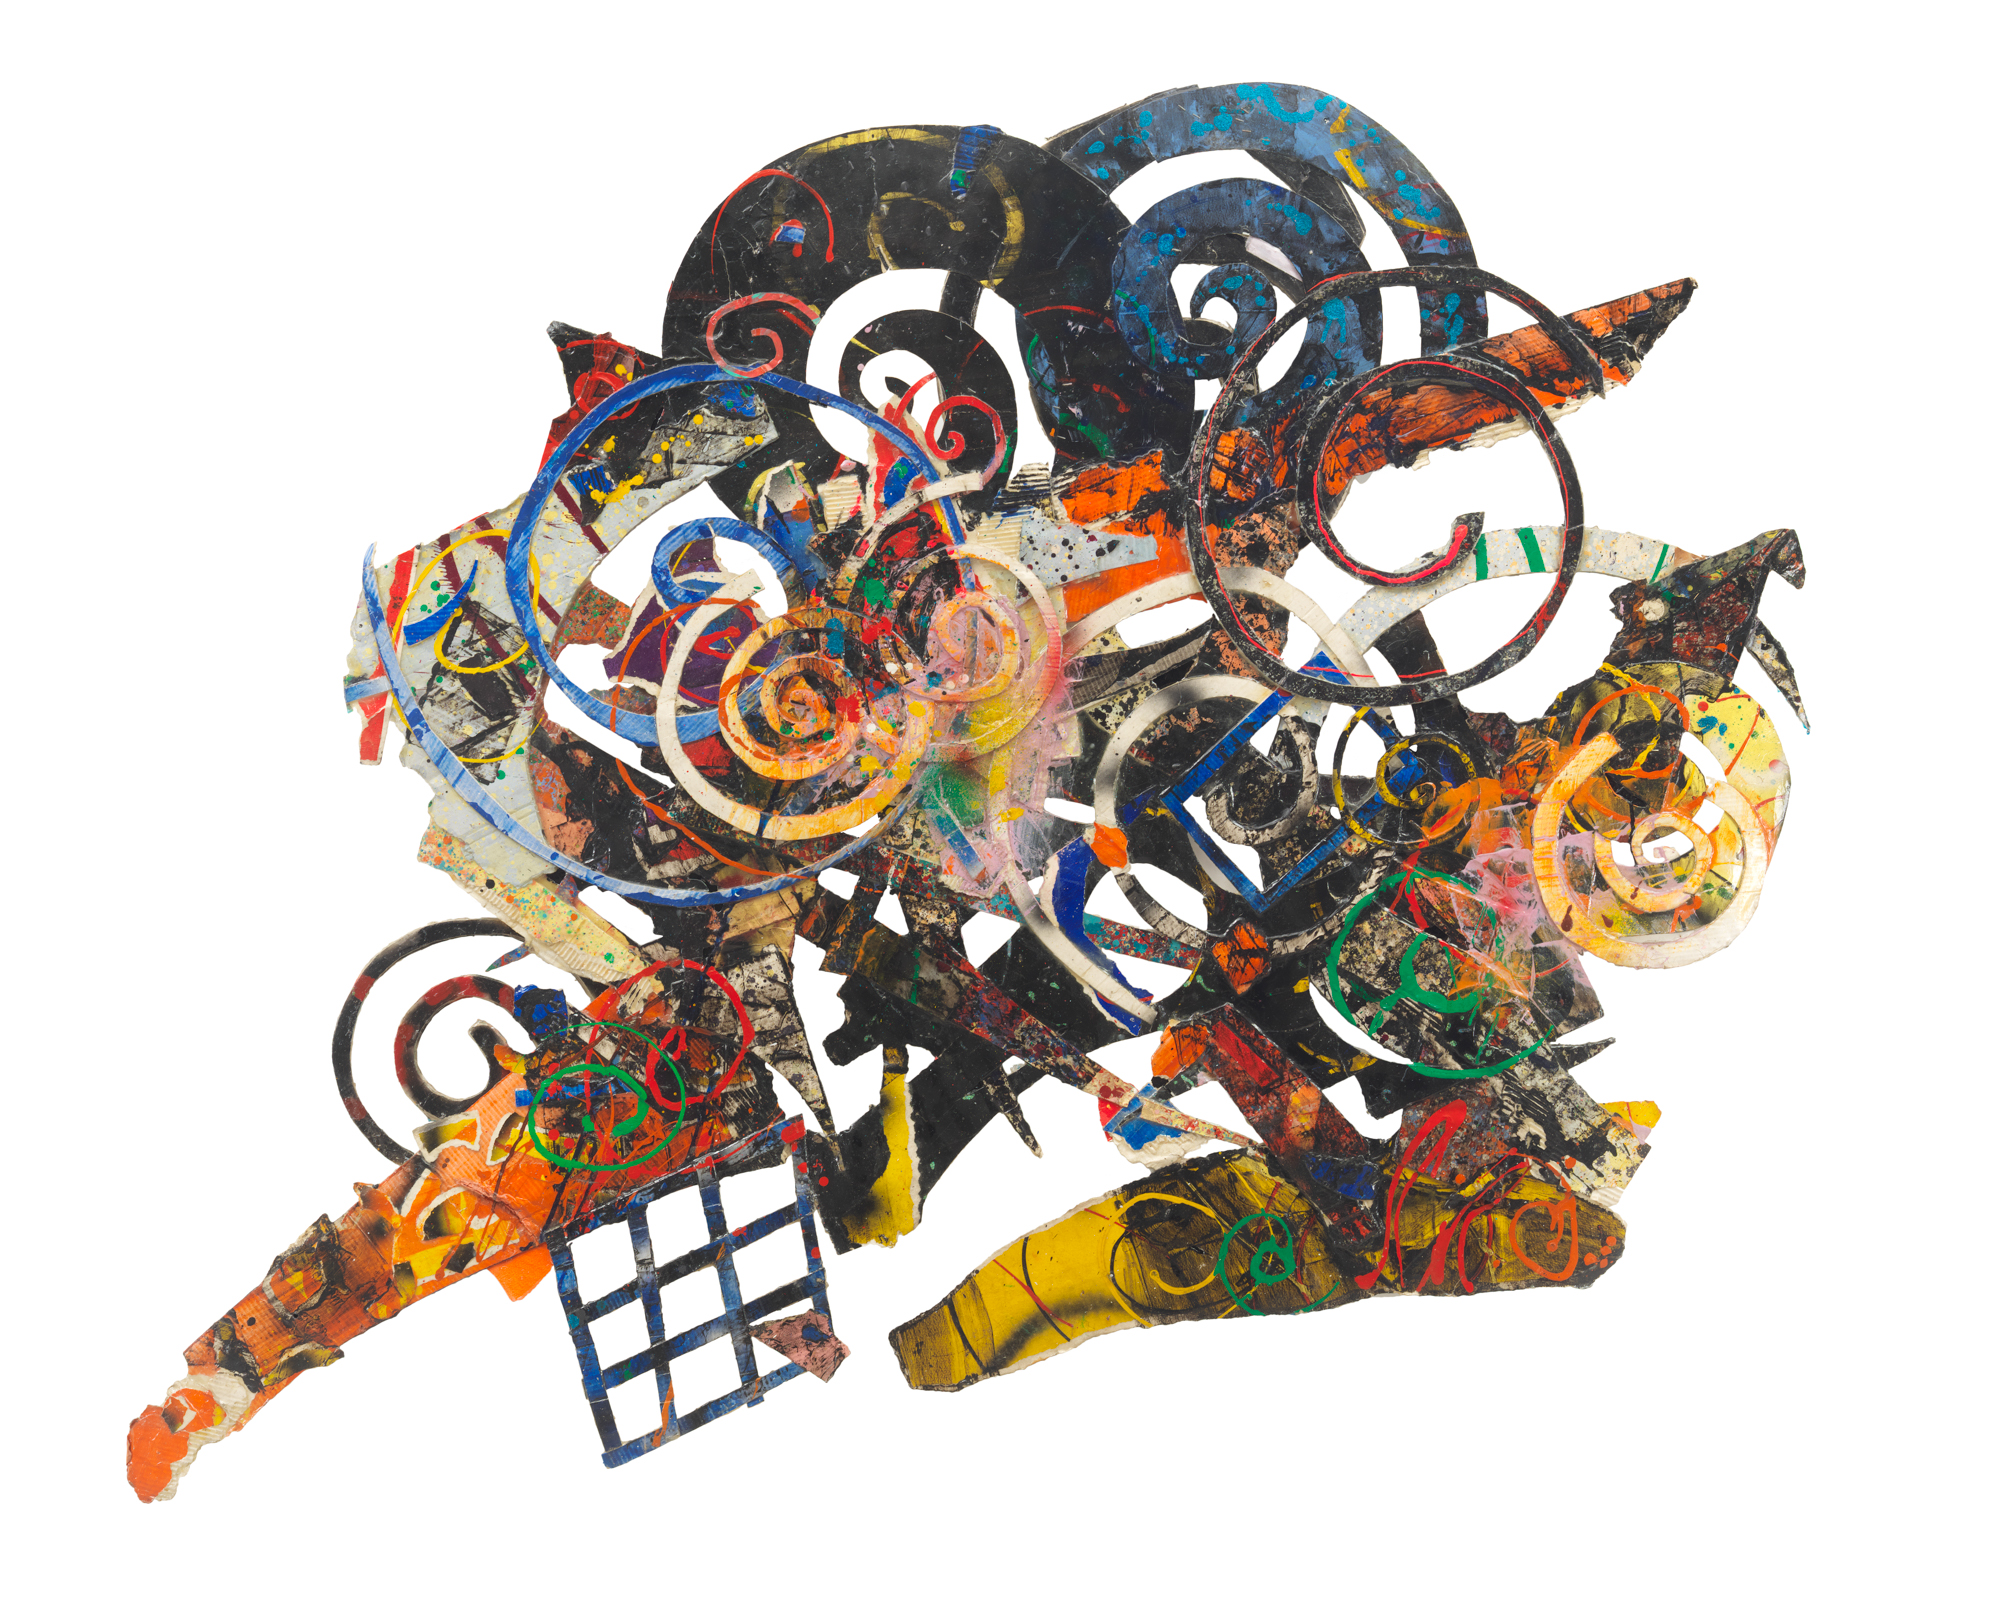 Al Loving, Humbird, 1989. Mixed media on board. 72 x 100 inches. Courtesy of the Estate of Al Loving and Garth Greenan Gallery, New York.